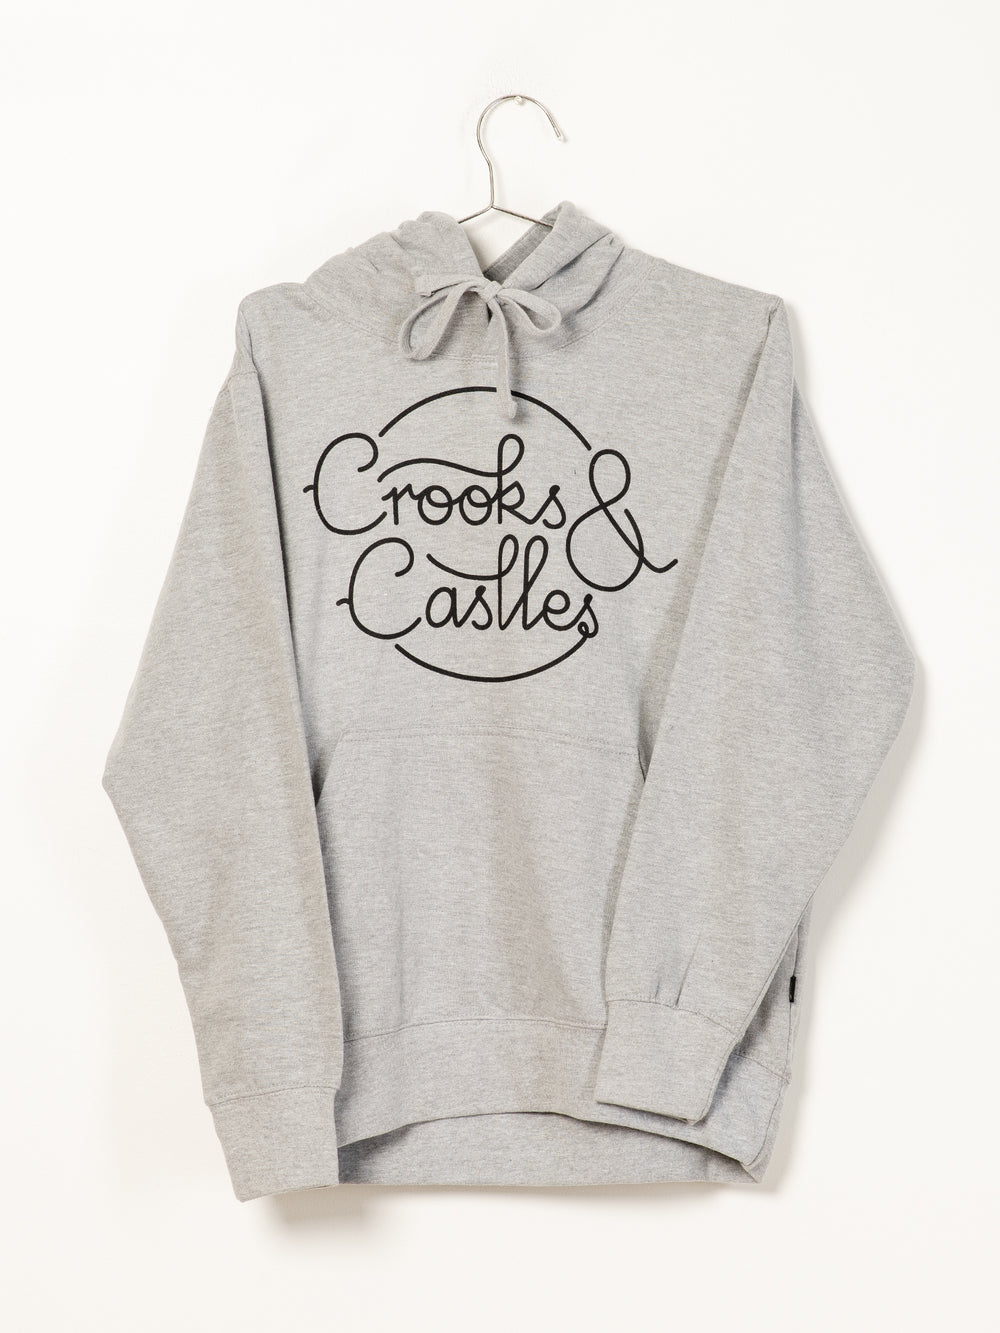 CROOKS & CASTLES SAIL PULLOVER HOODIE - CLEARANCE